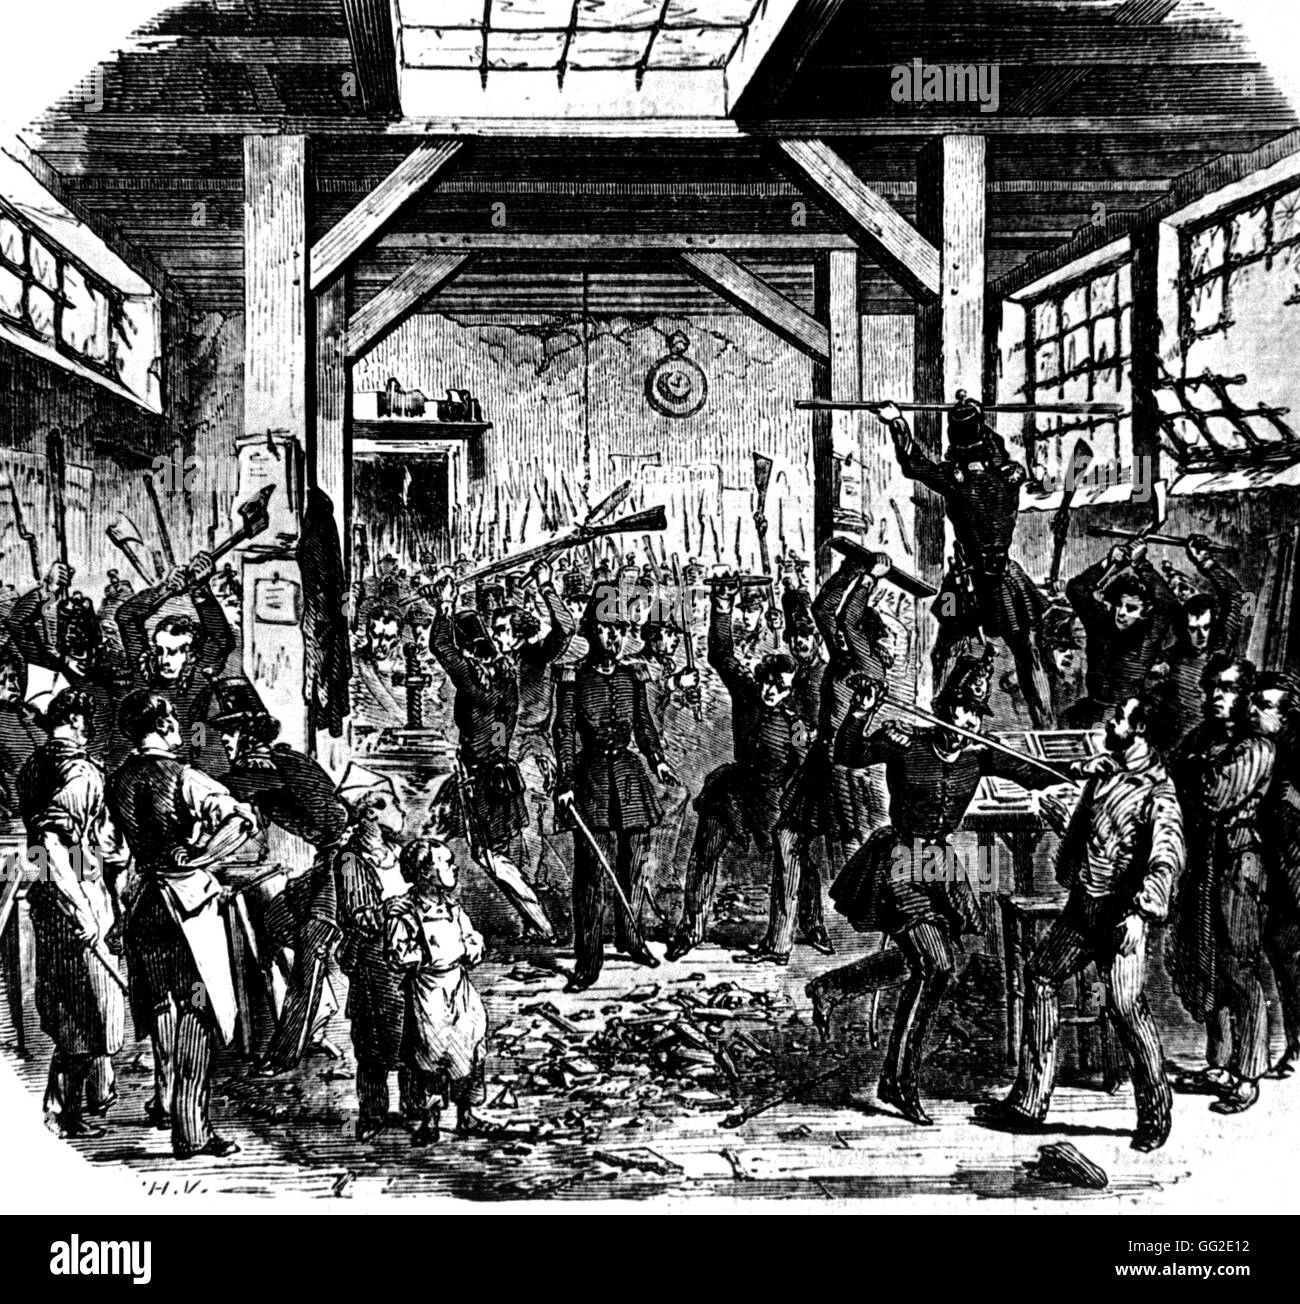 June 13, 1849: Men from the National Guard entering the Boute printing works which prints democratic newspapers 1849 France Paris. Musée Carnavalet Stock Photo